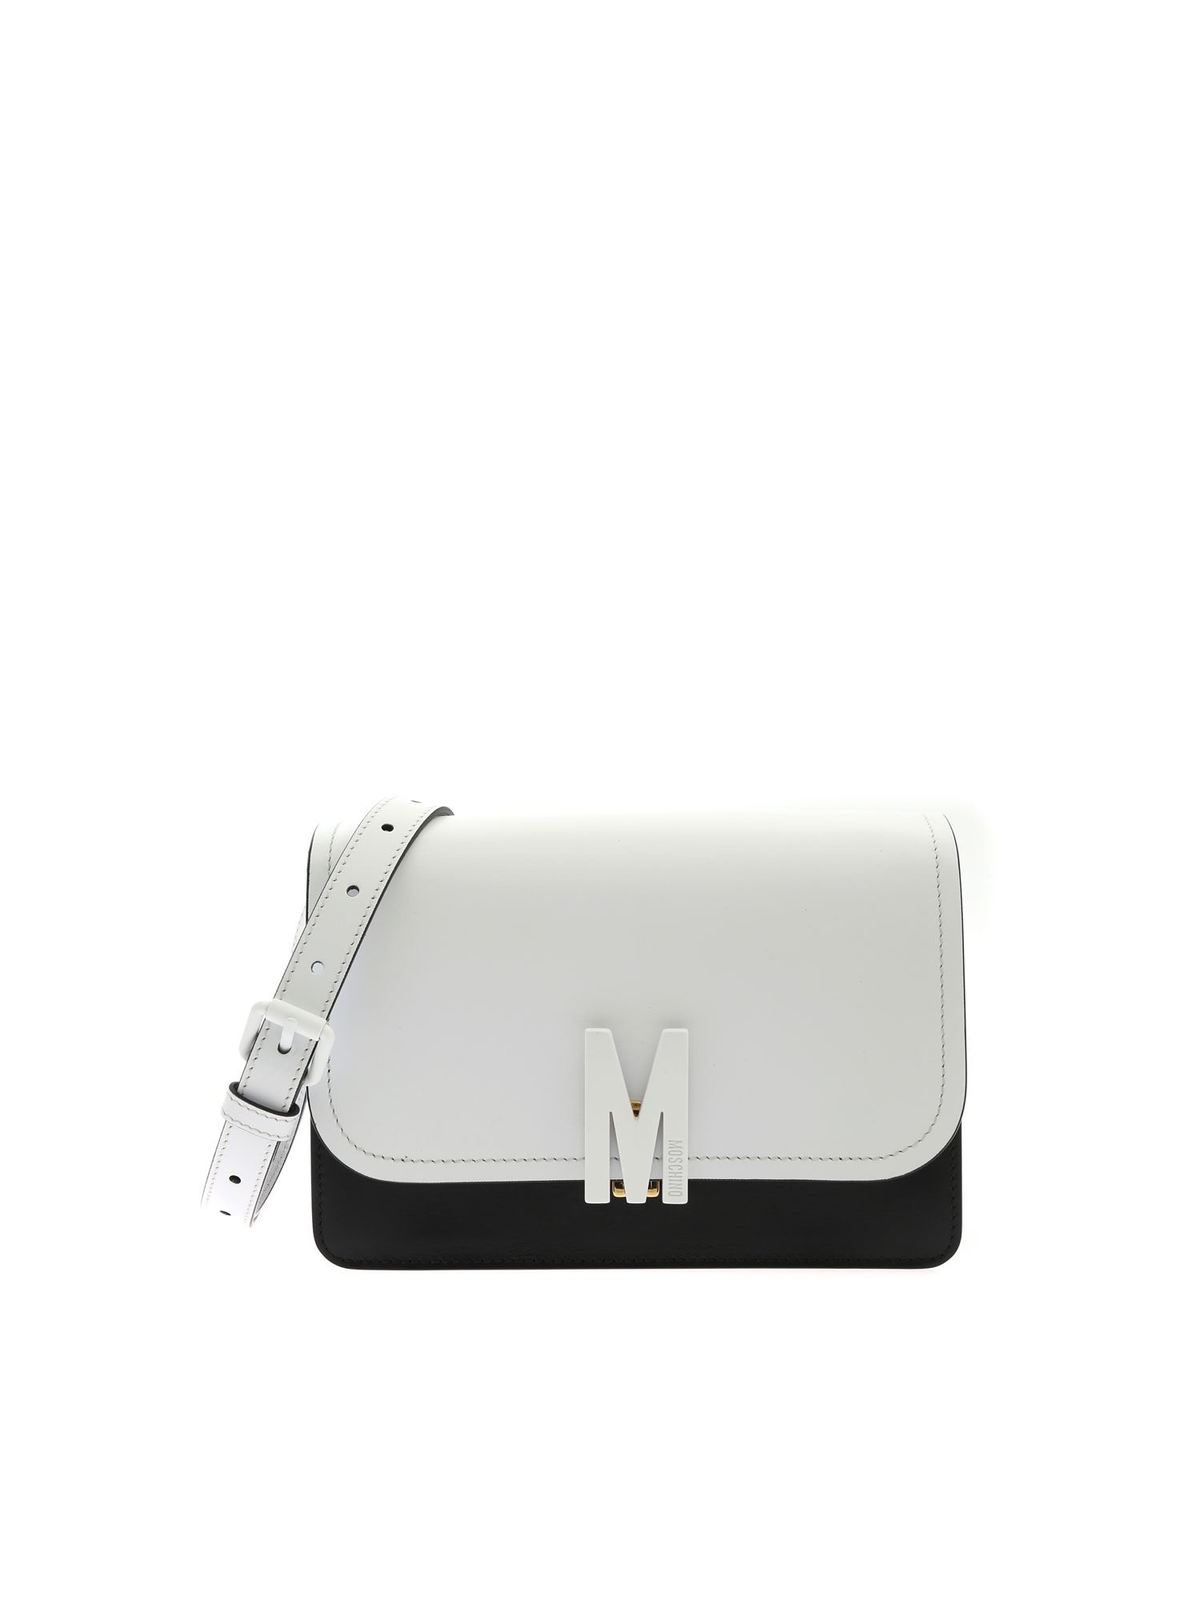 Moschino M Bicolor Shoulder Bag In White And Black In Blanco